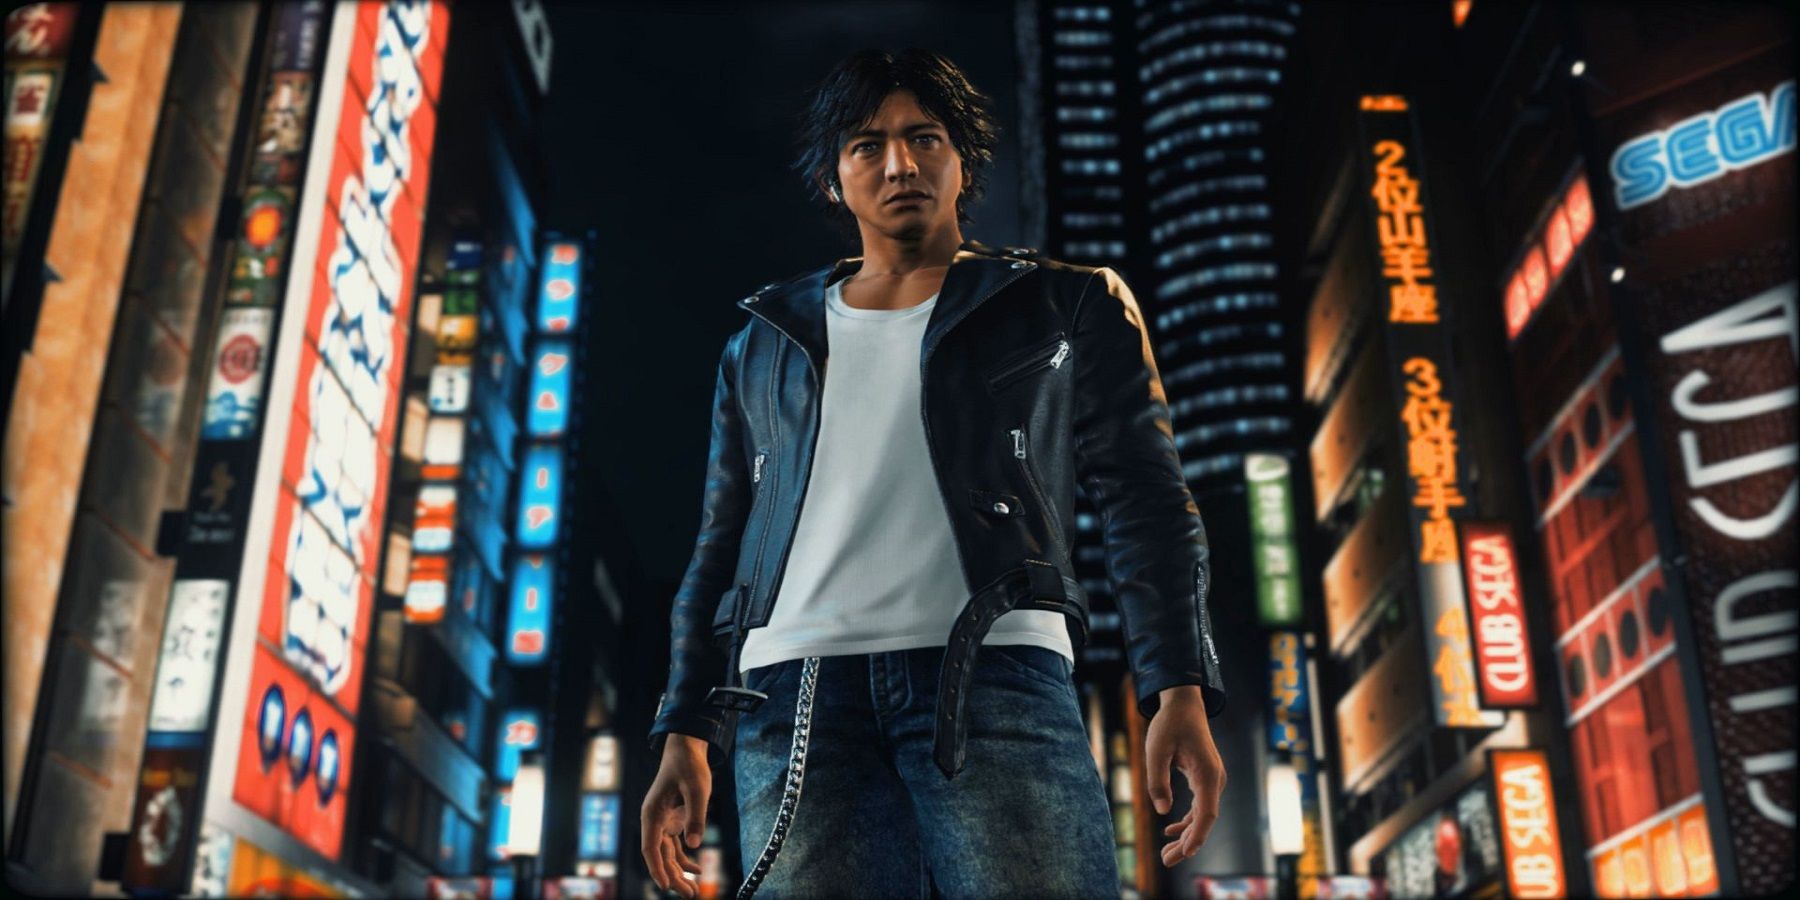 Yagami from Judgment standing in the streets of Kamurocho